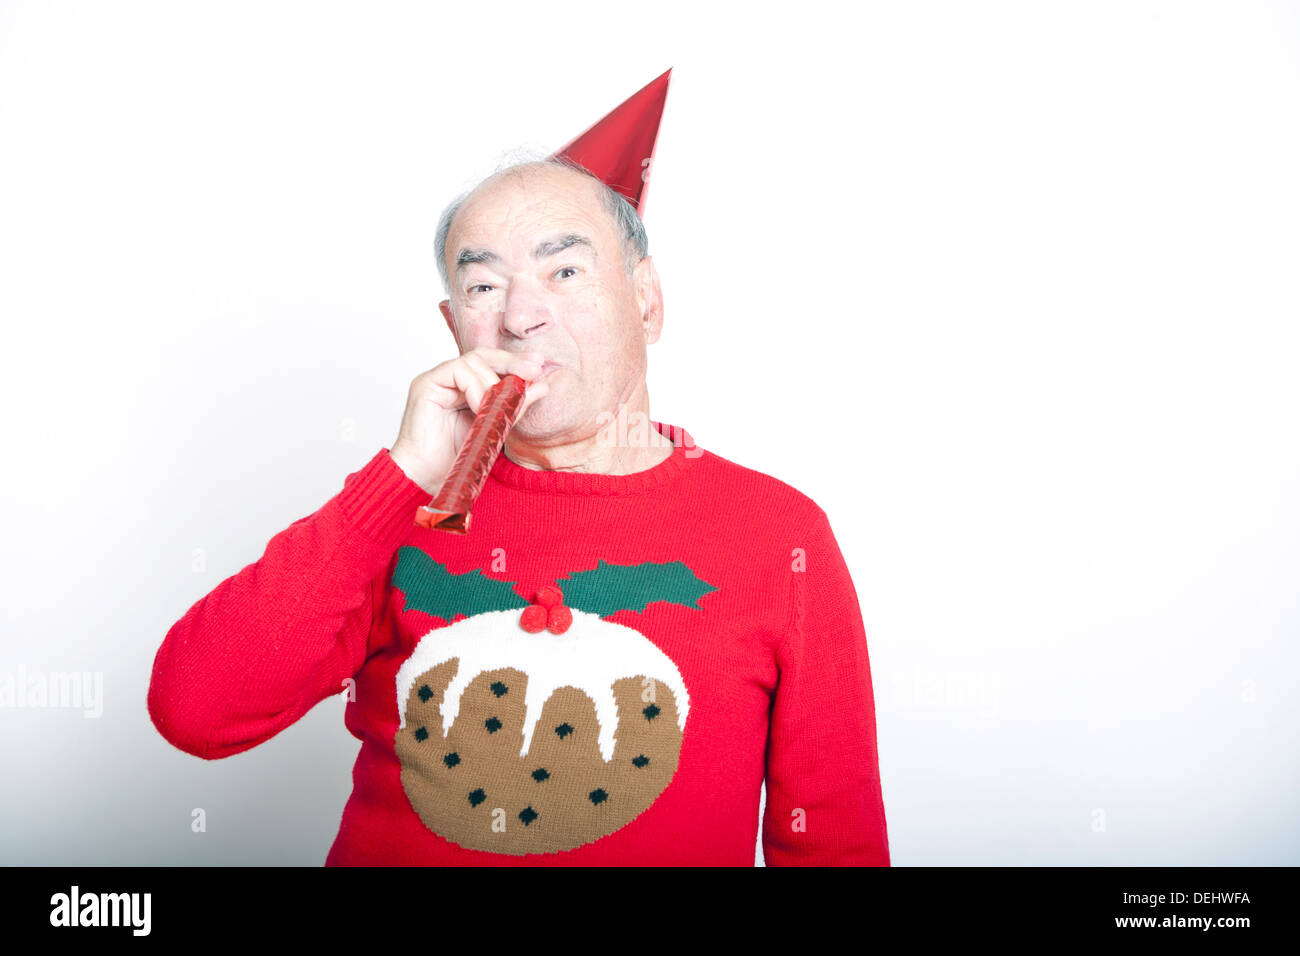 Senior adult man wearing Christmas jumper blowing party blower Stock Photo